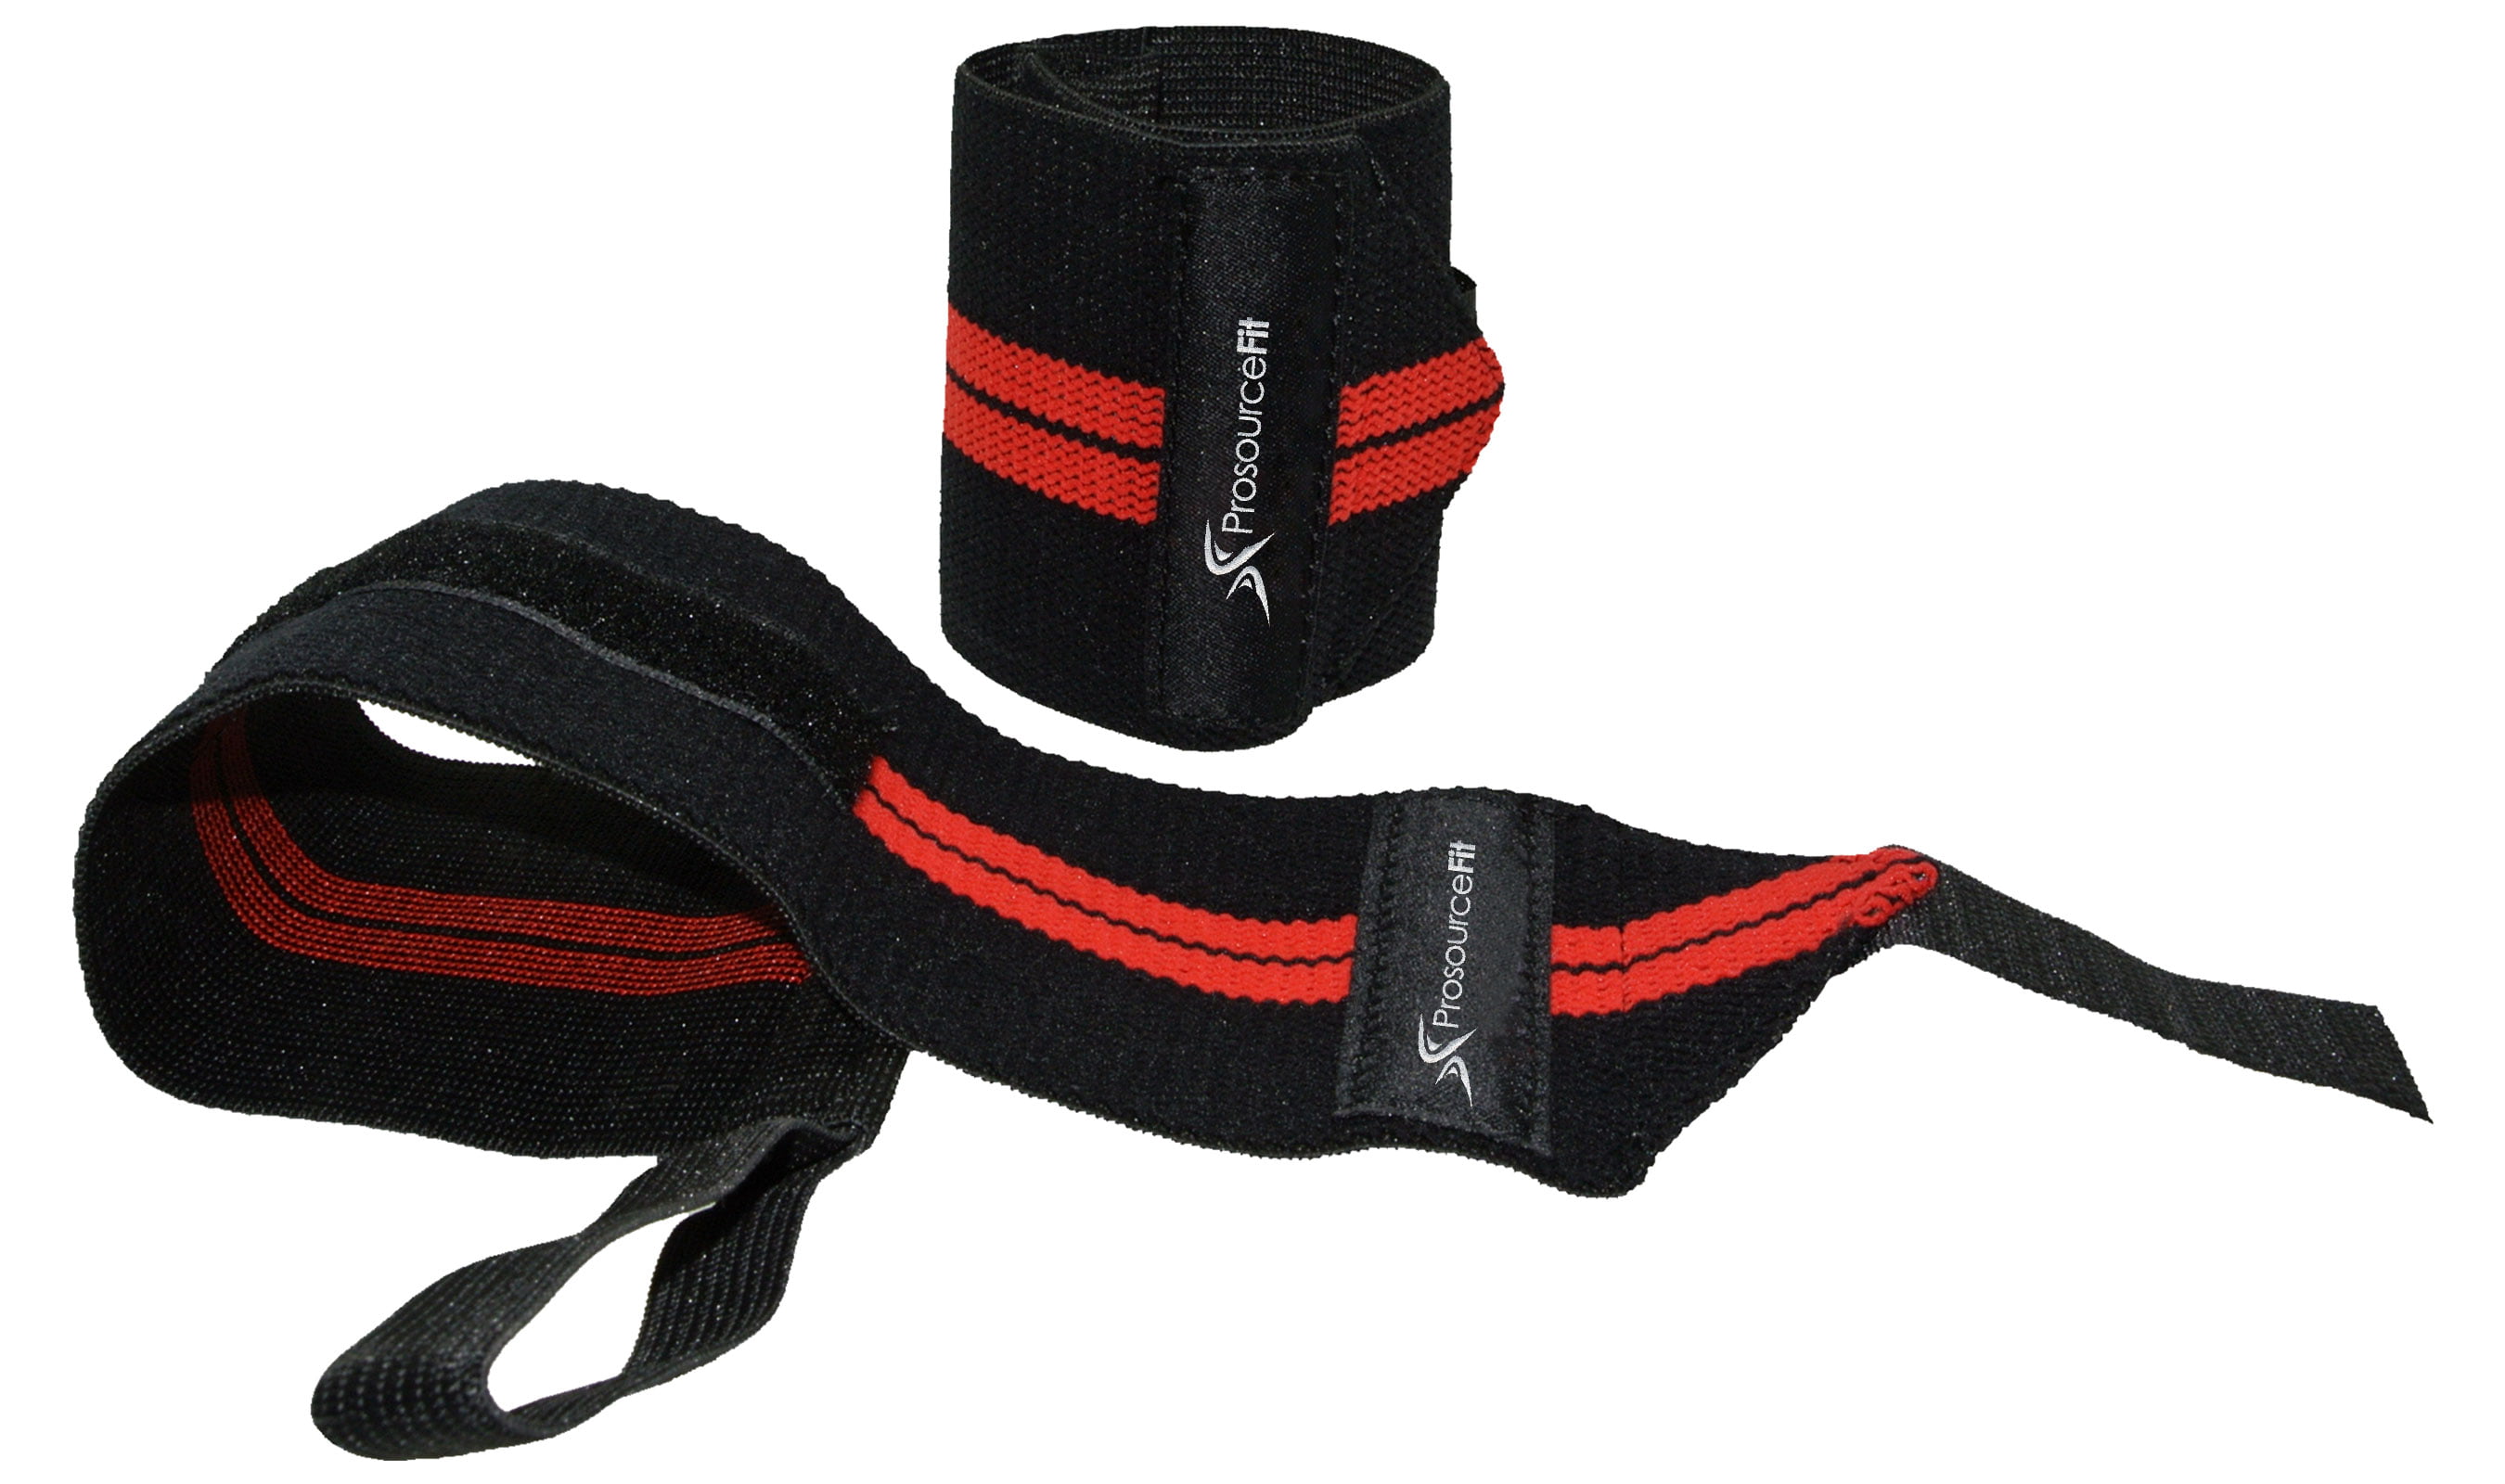 Details about   WEIGHT LIFTING BODYBUILDING GYM TRAINING WRIST SUPPORT BAR STRAPS WRAPS FITNESS 